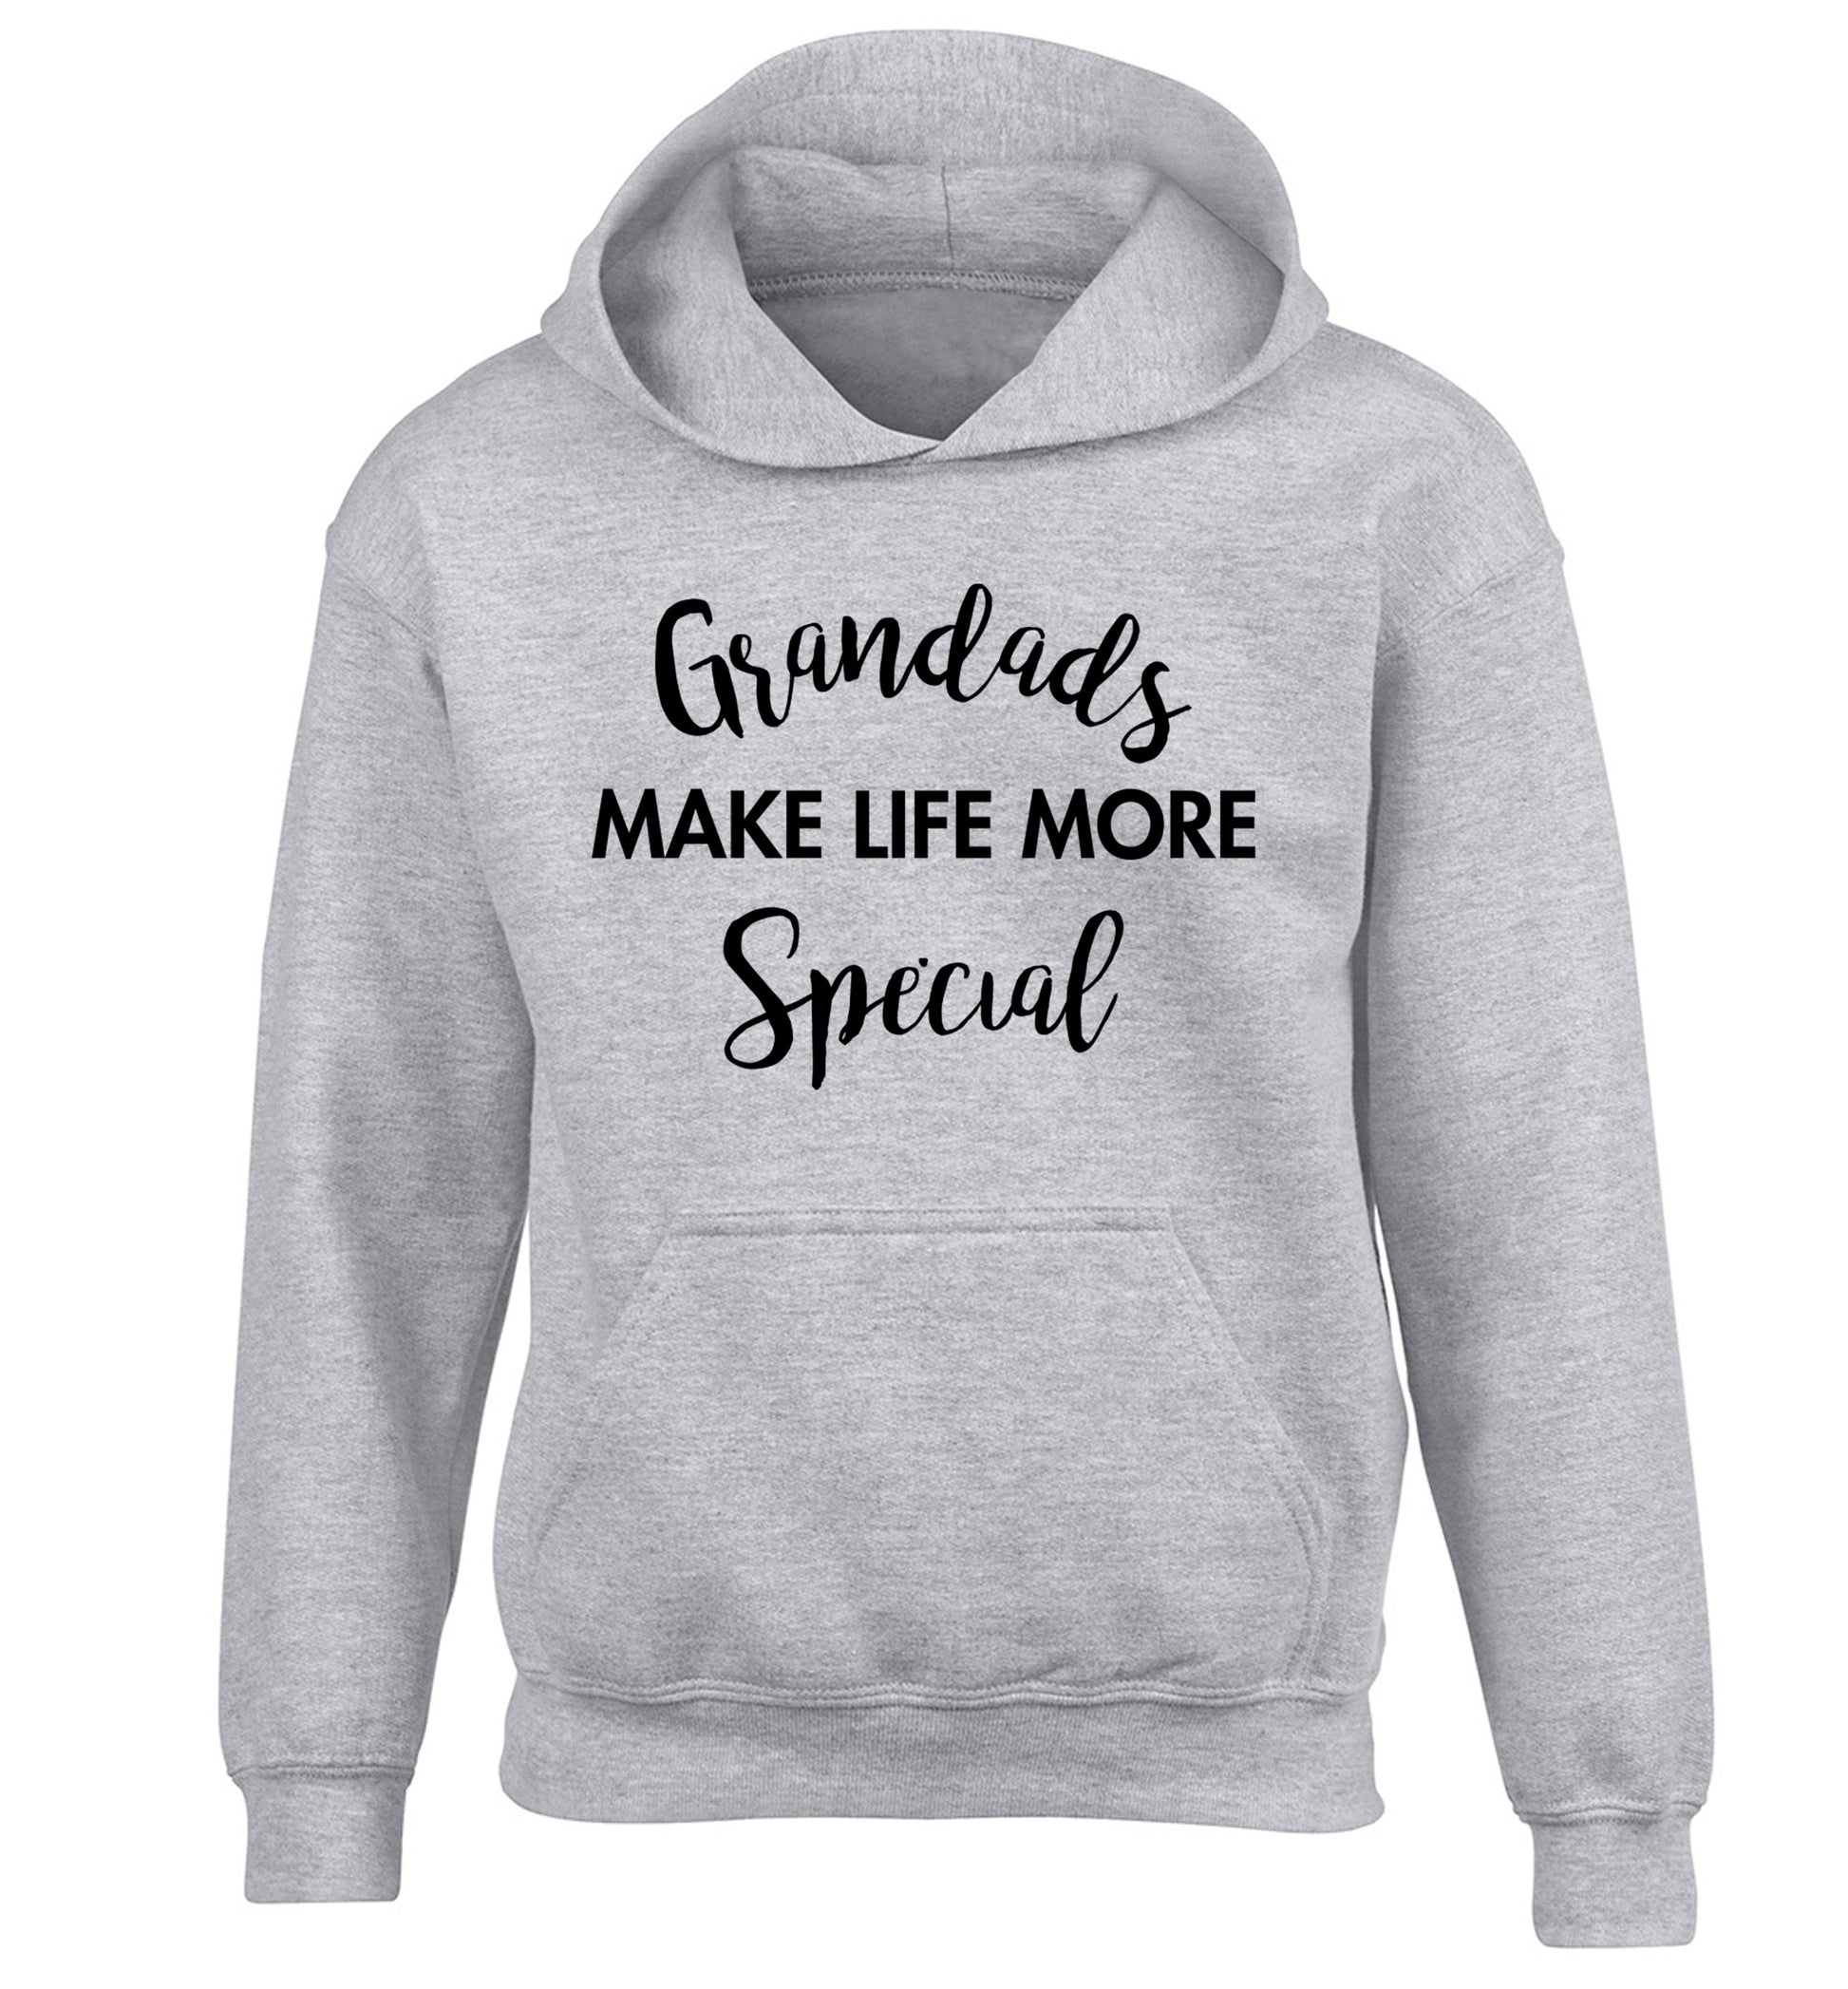 Grandads make life more special children's grey hoodie 12-14 Years